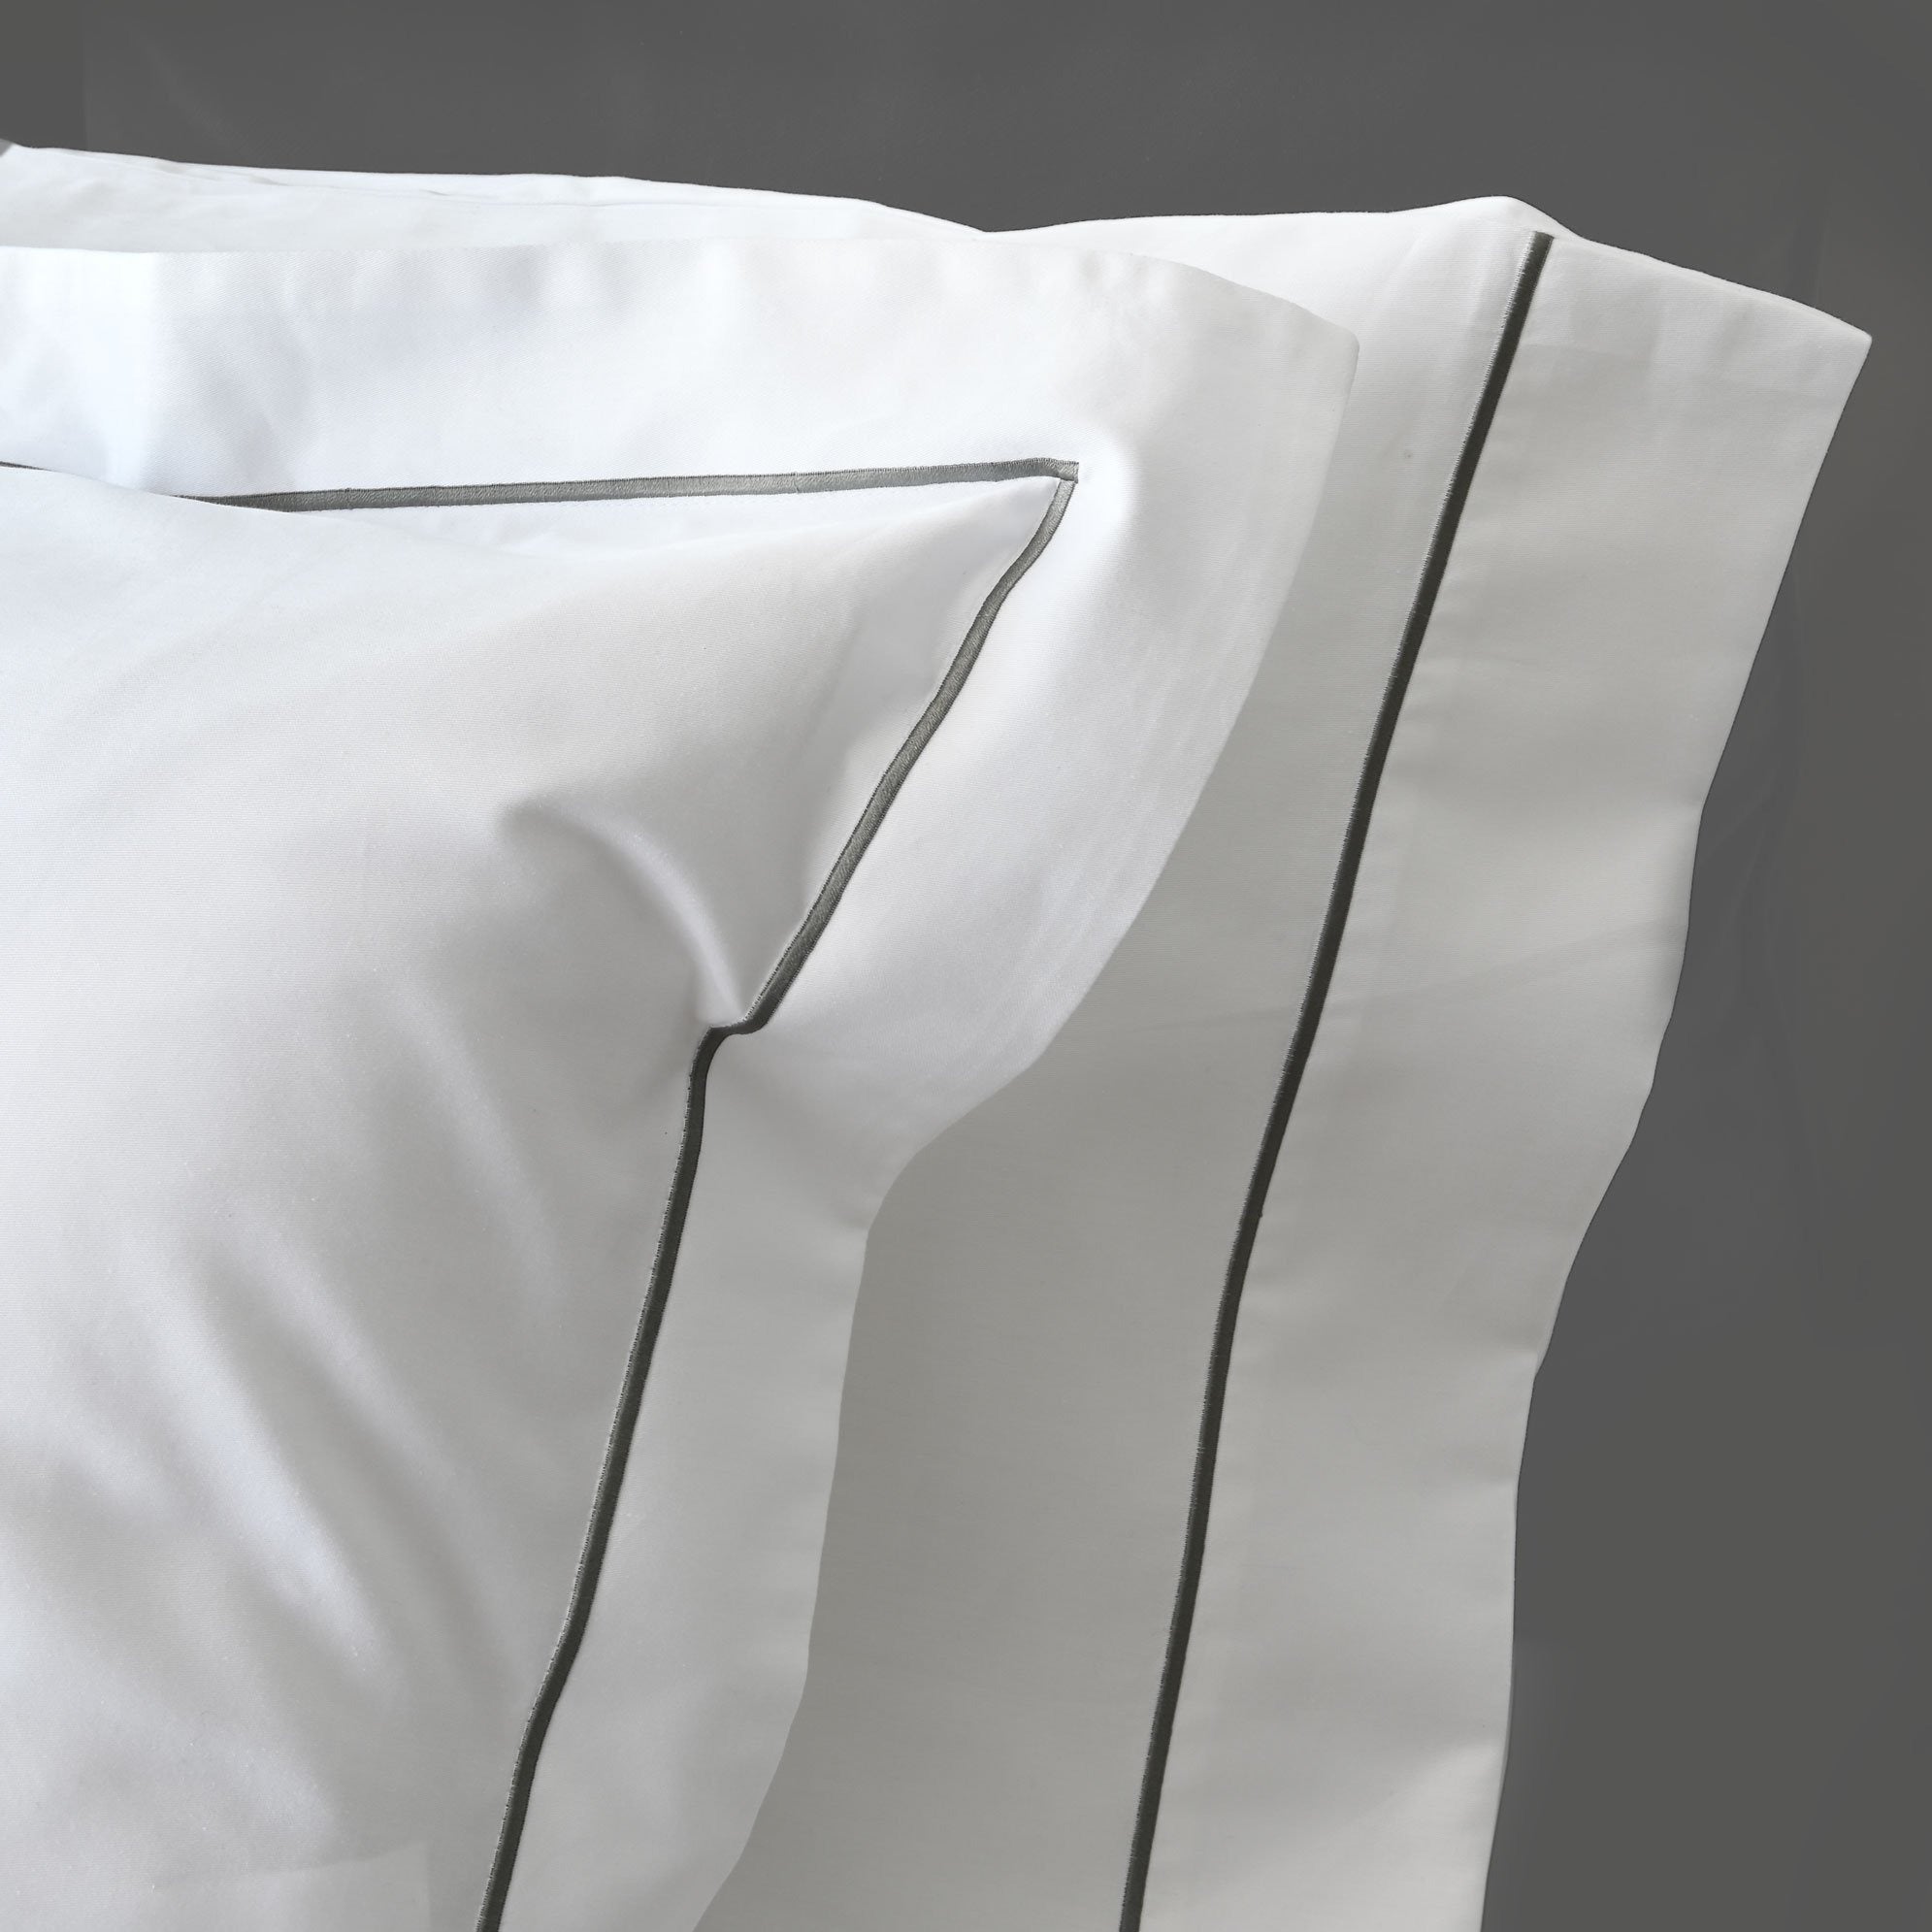 Imperial Hotel Bed Linens